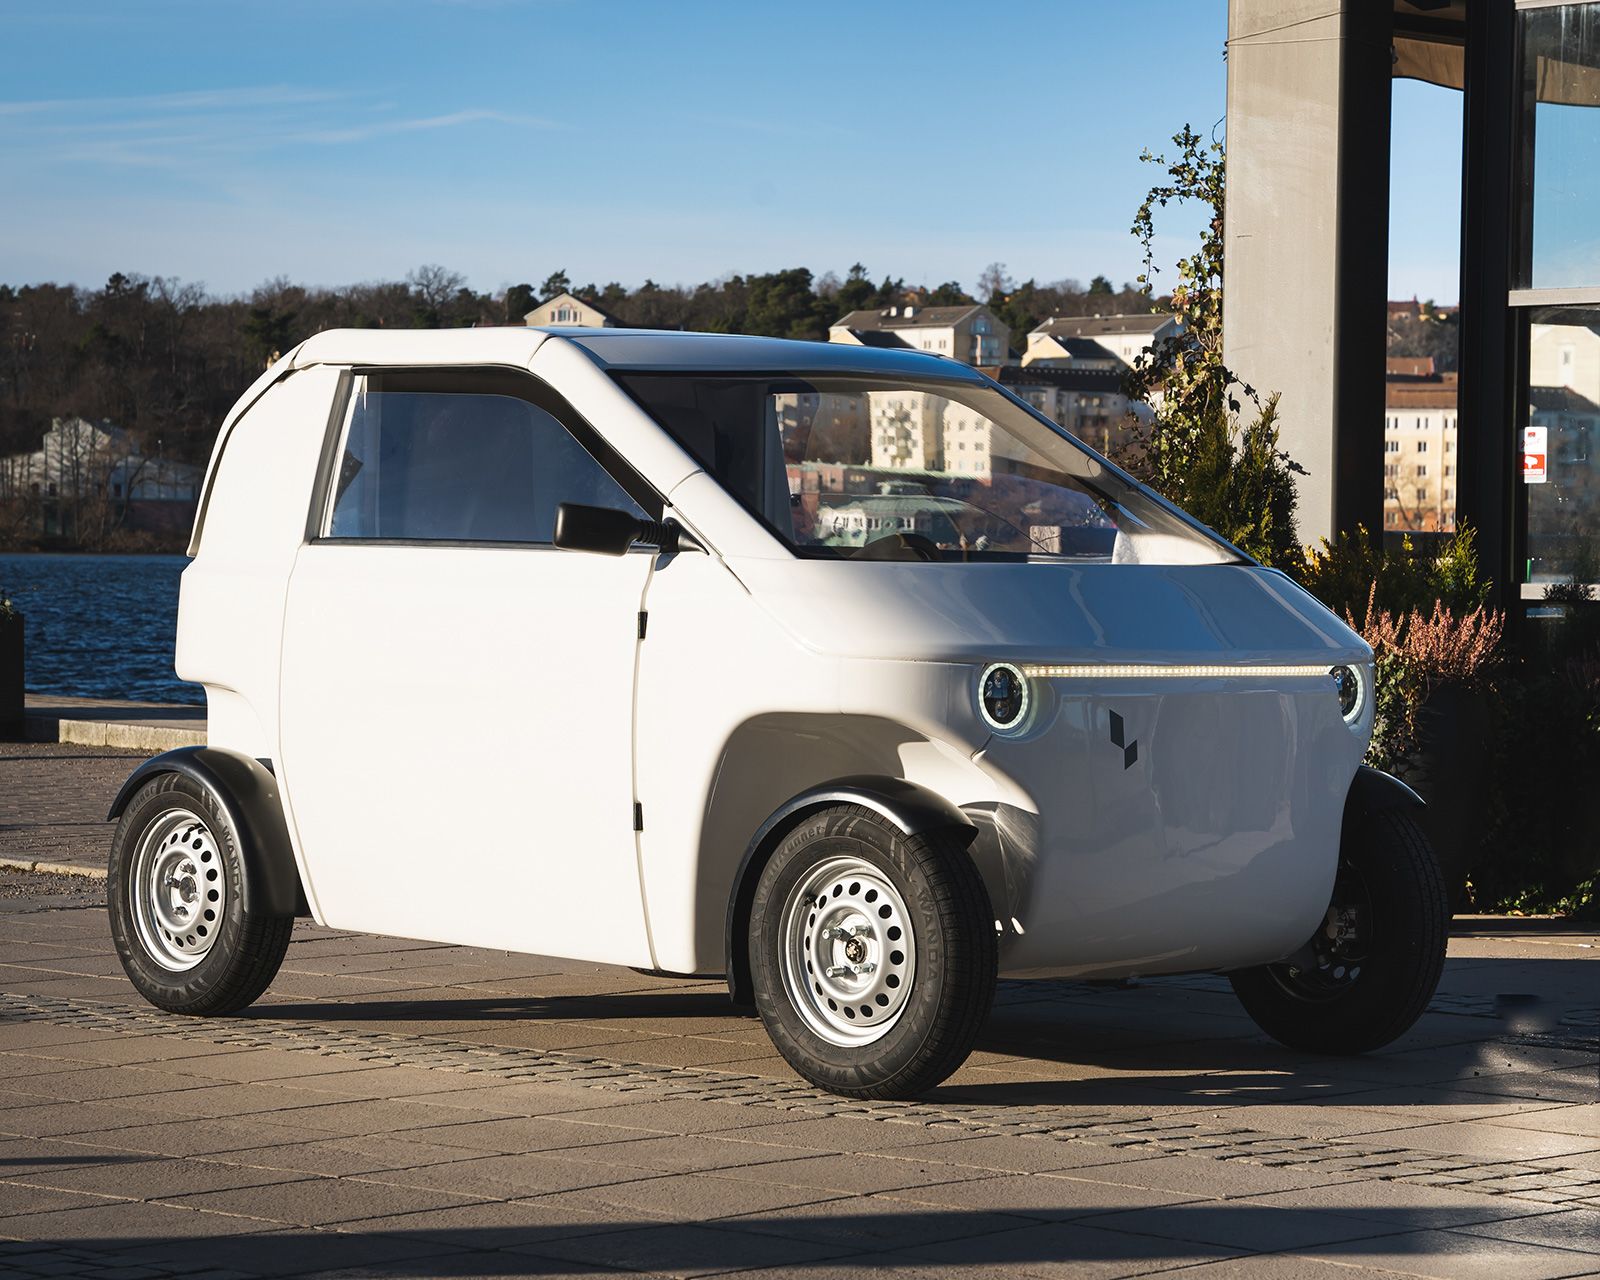 Swedish startup Luvly is making flat-pack electric microcars